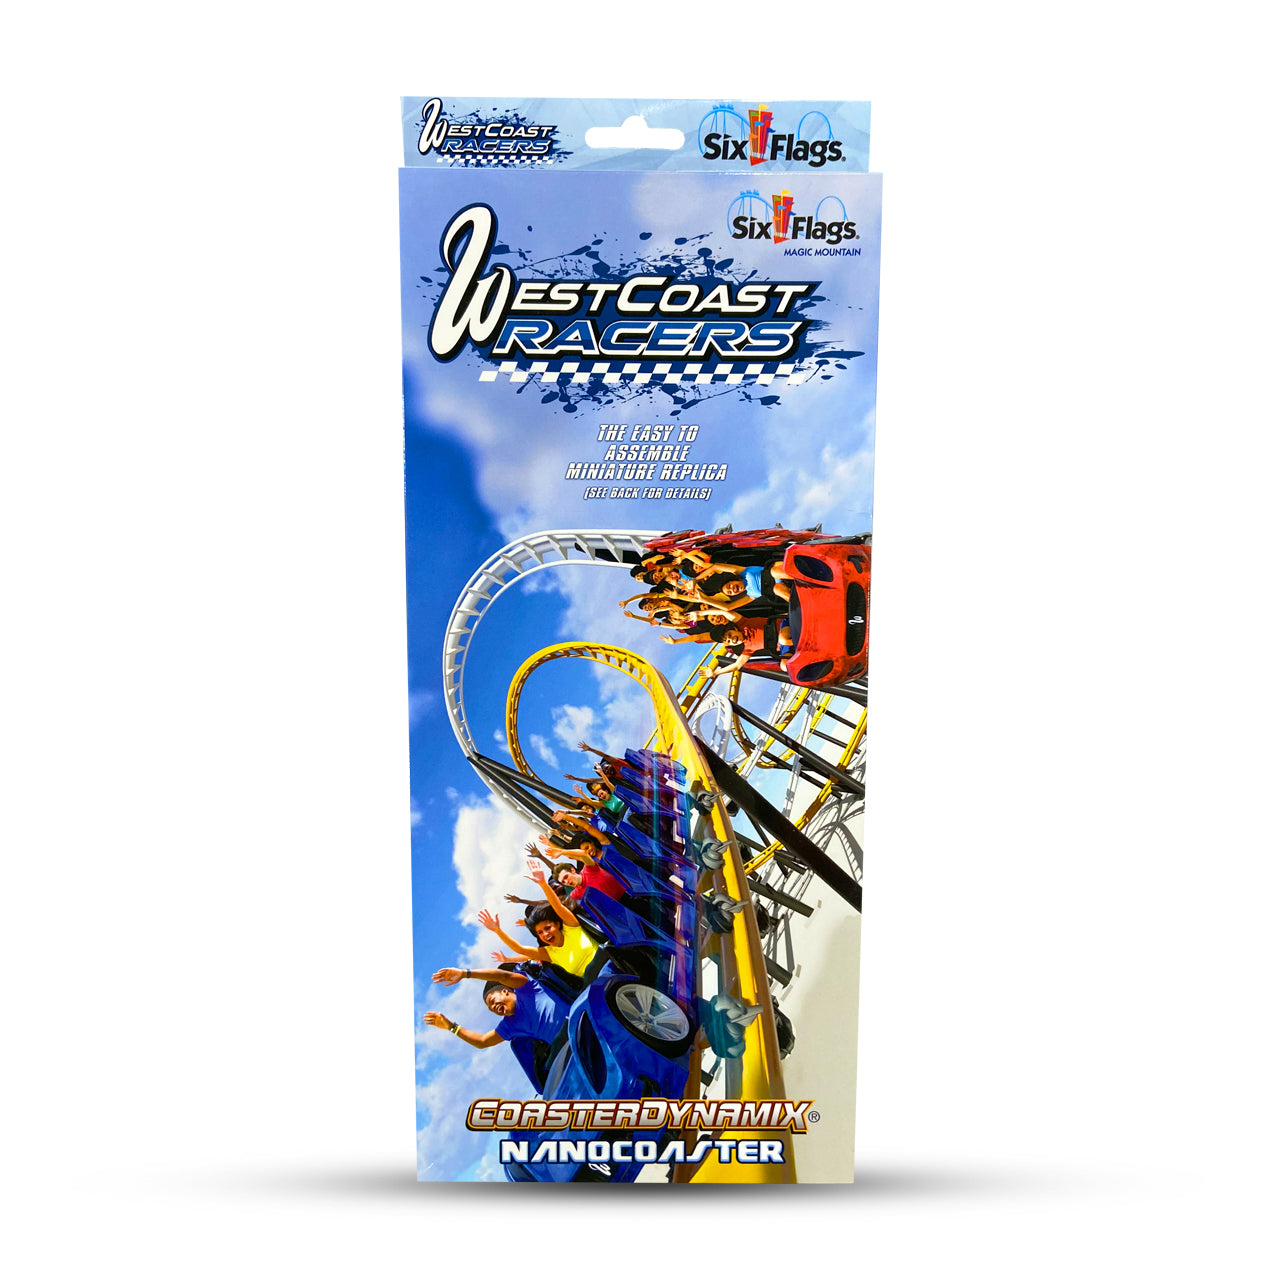 WEST COAST RACERS SIX FLAGS MAGIC MOUNTAIN SIX FLAGS NANOCOASTER PACKAGE